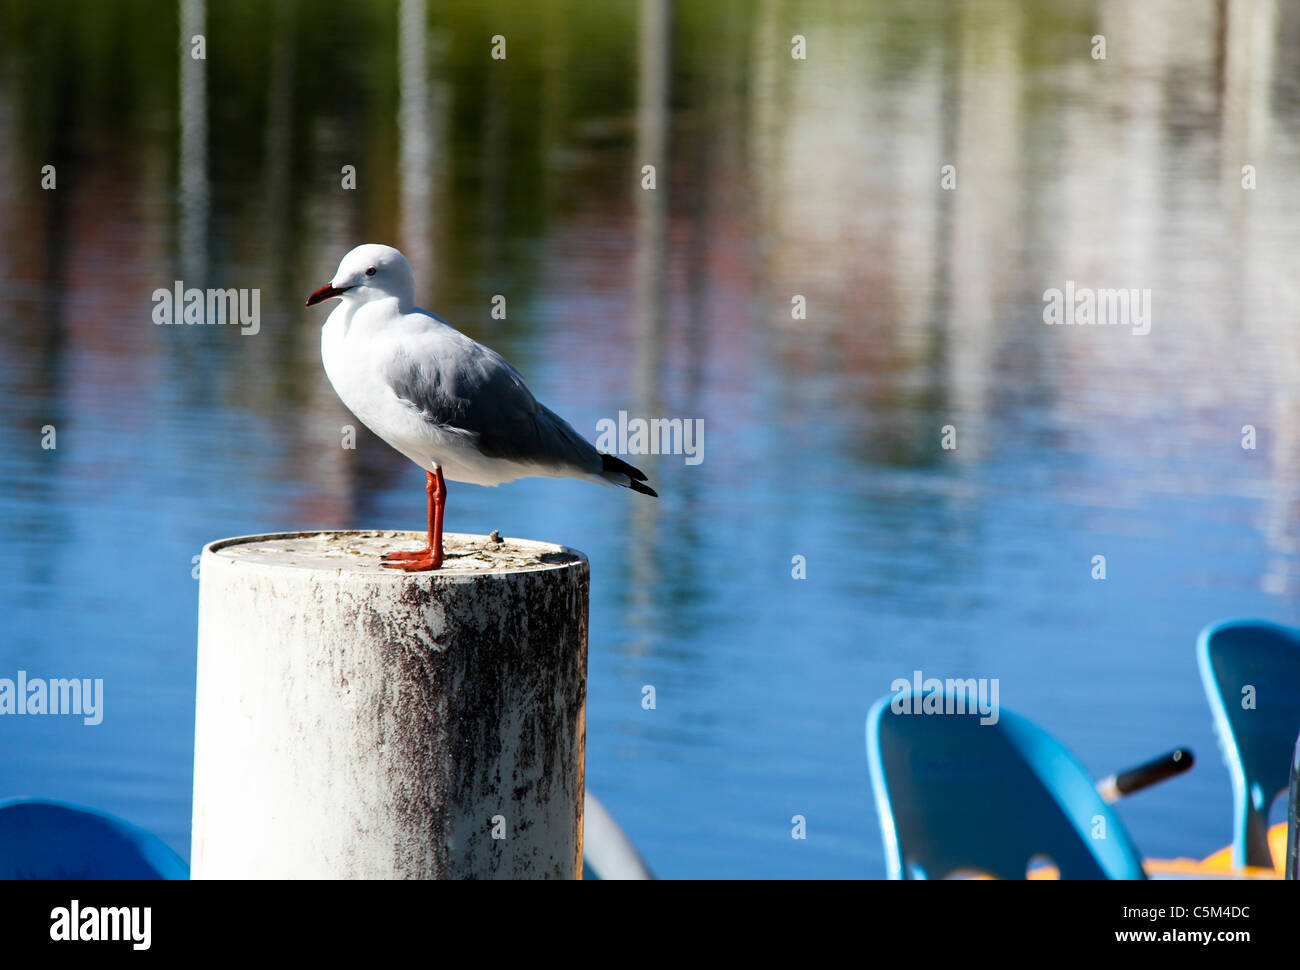 Seagull standing on a mooring pole against water Stock Photo